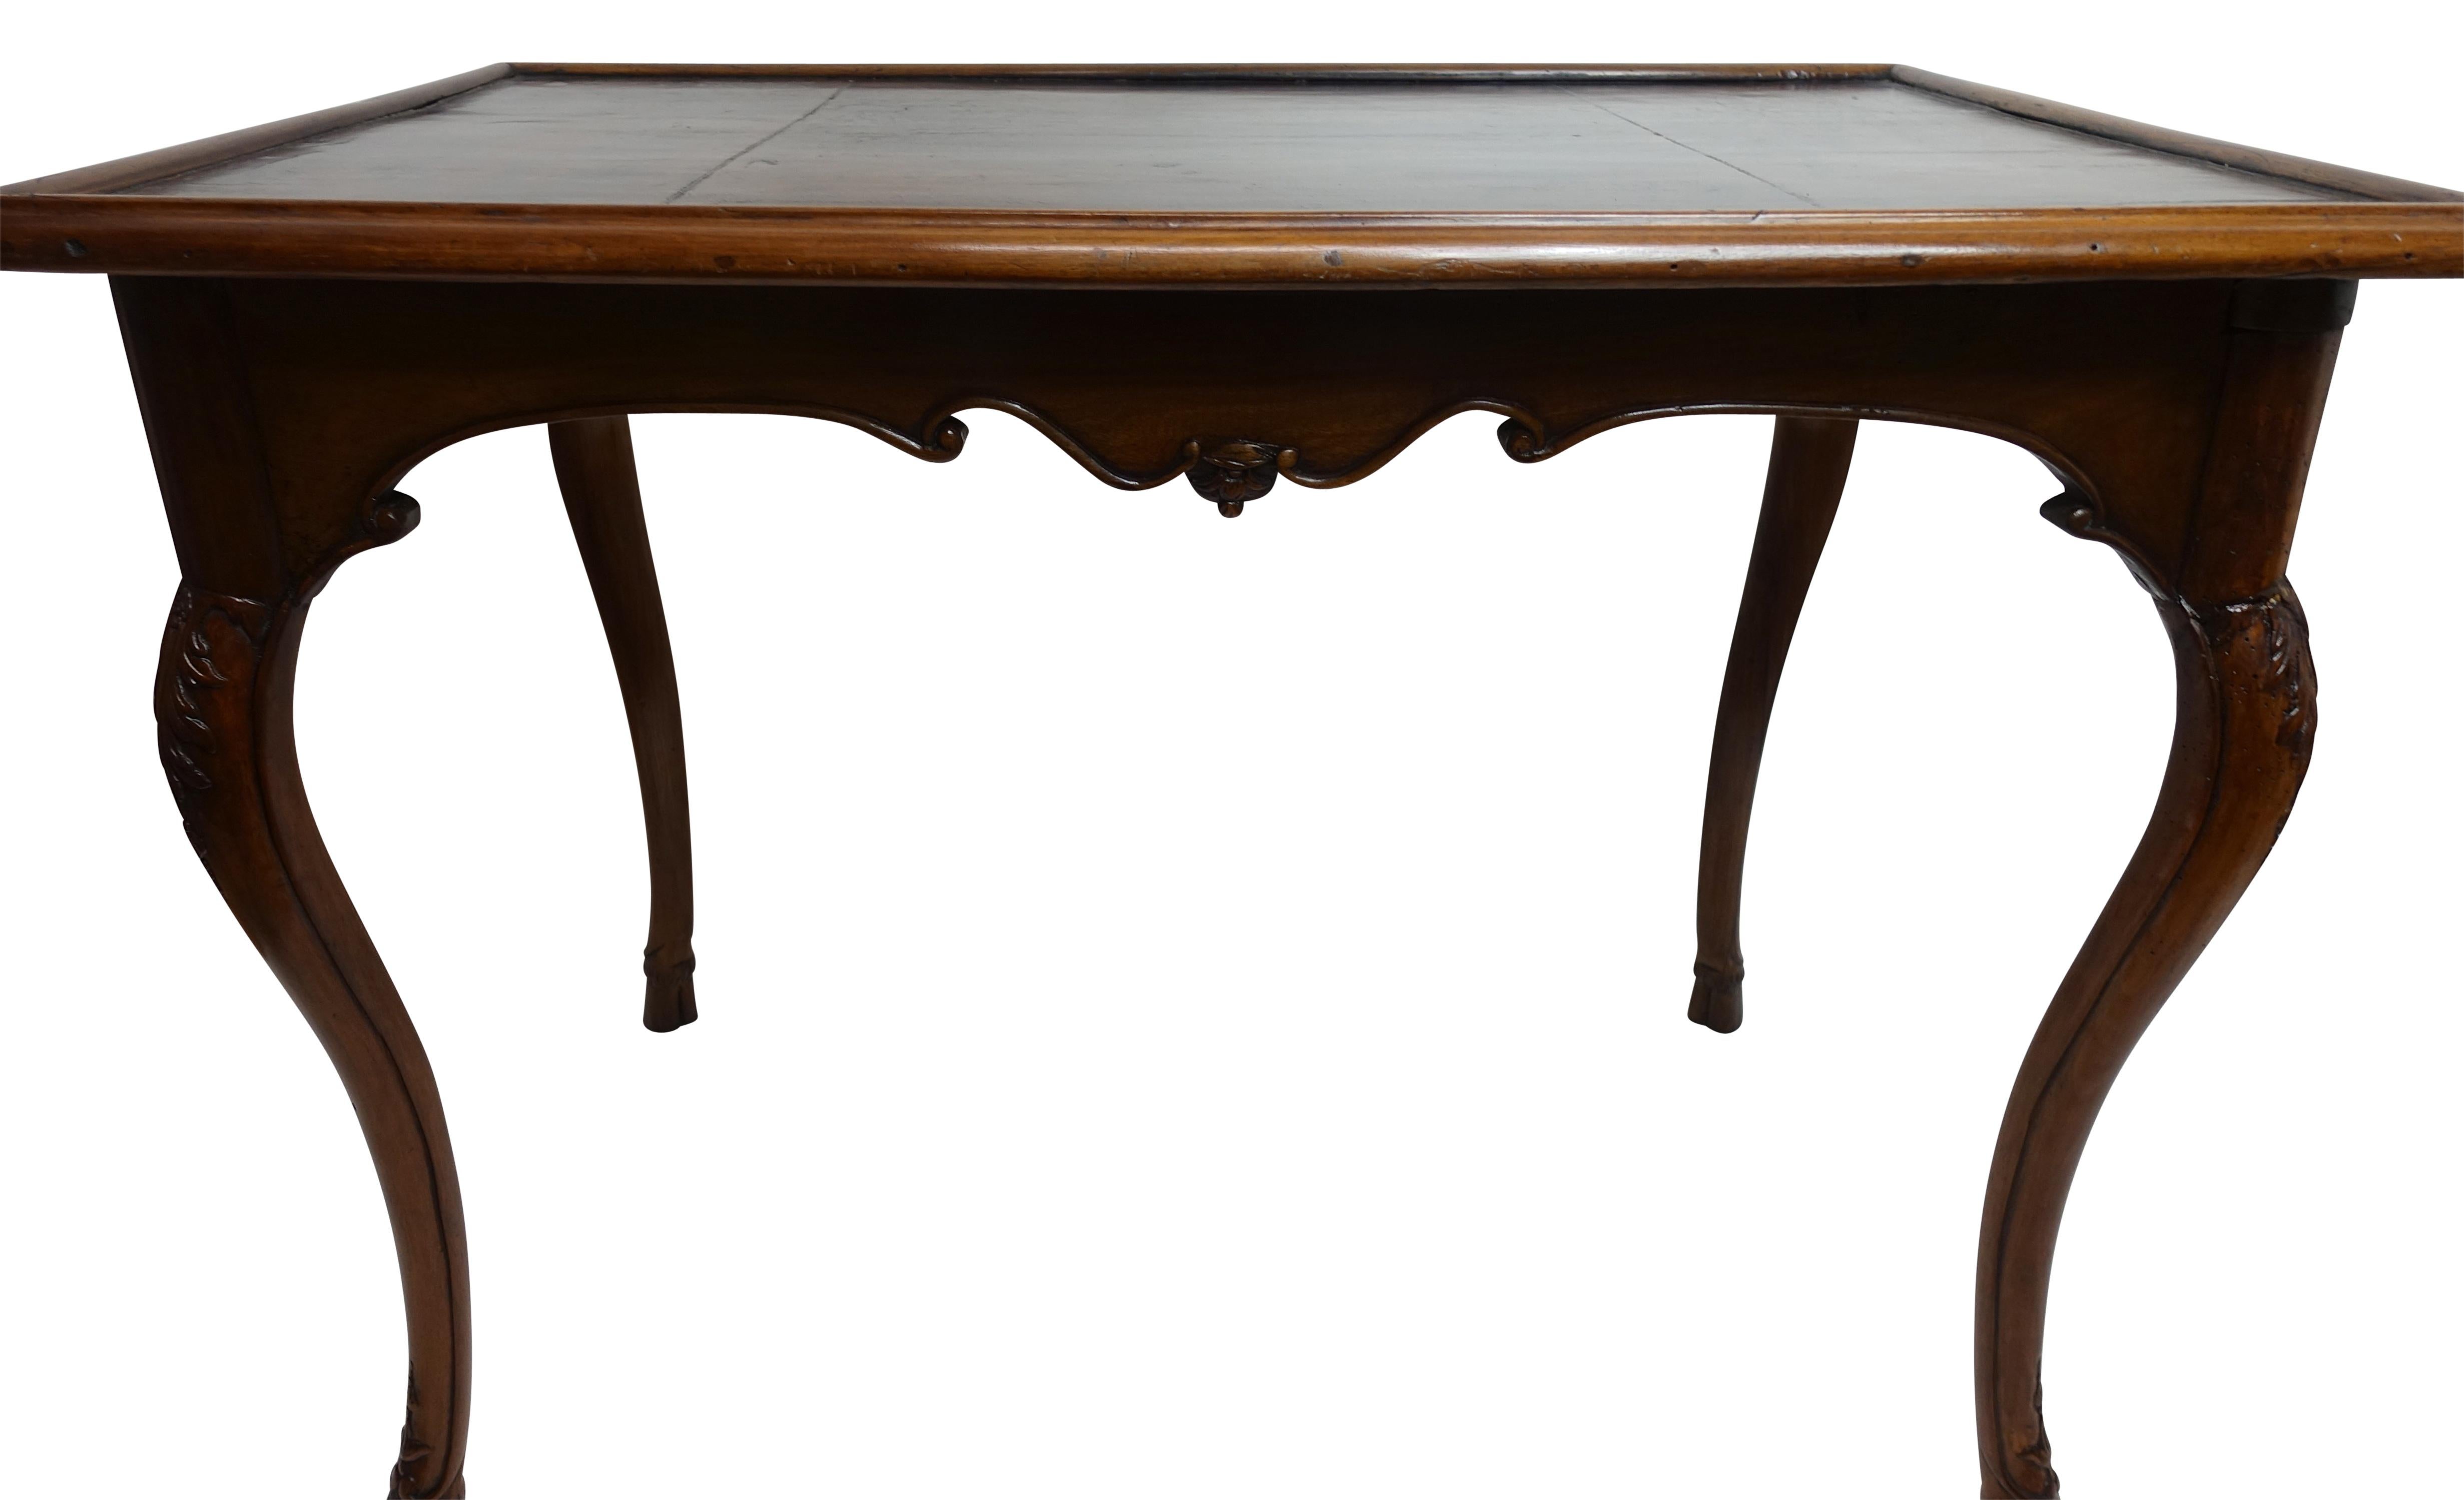 Carved Walnut Game Table with Inset Leather Top, French, 18th Century 7